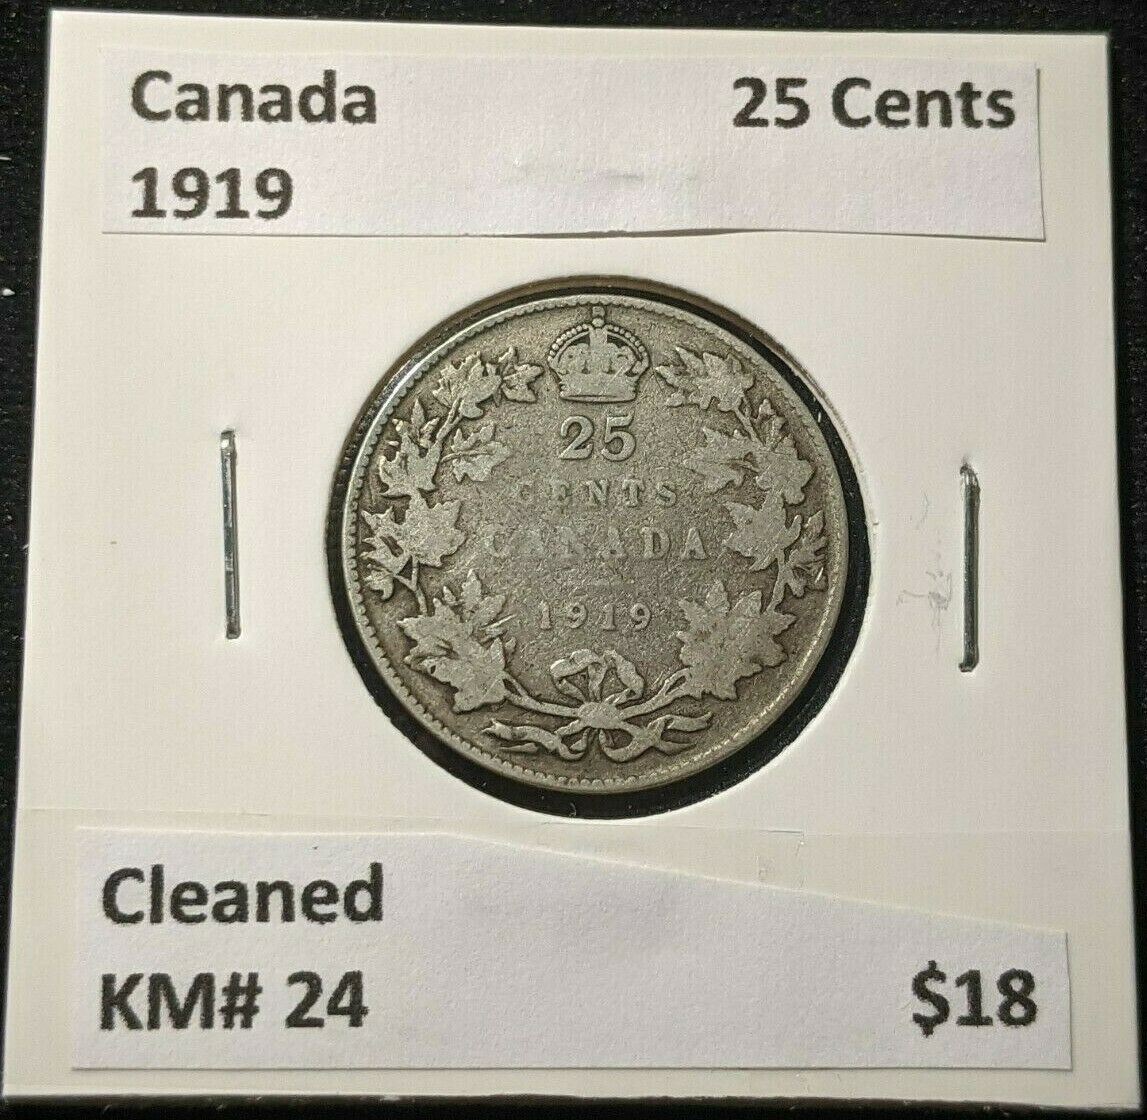 Canada 1919 25 Cents KM# 24 Cleaned #1202